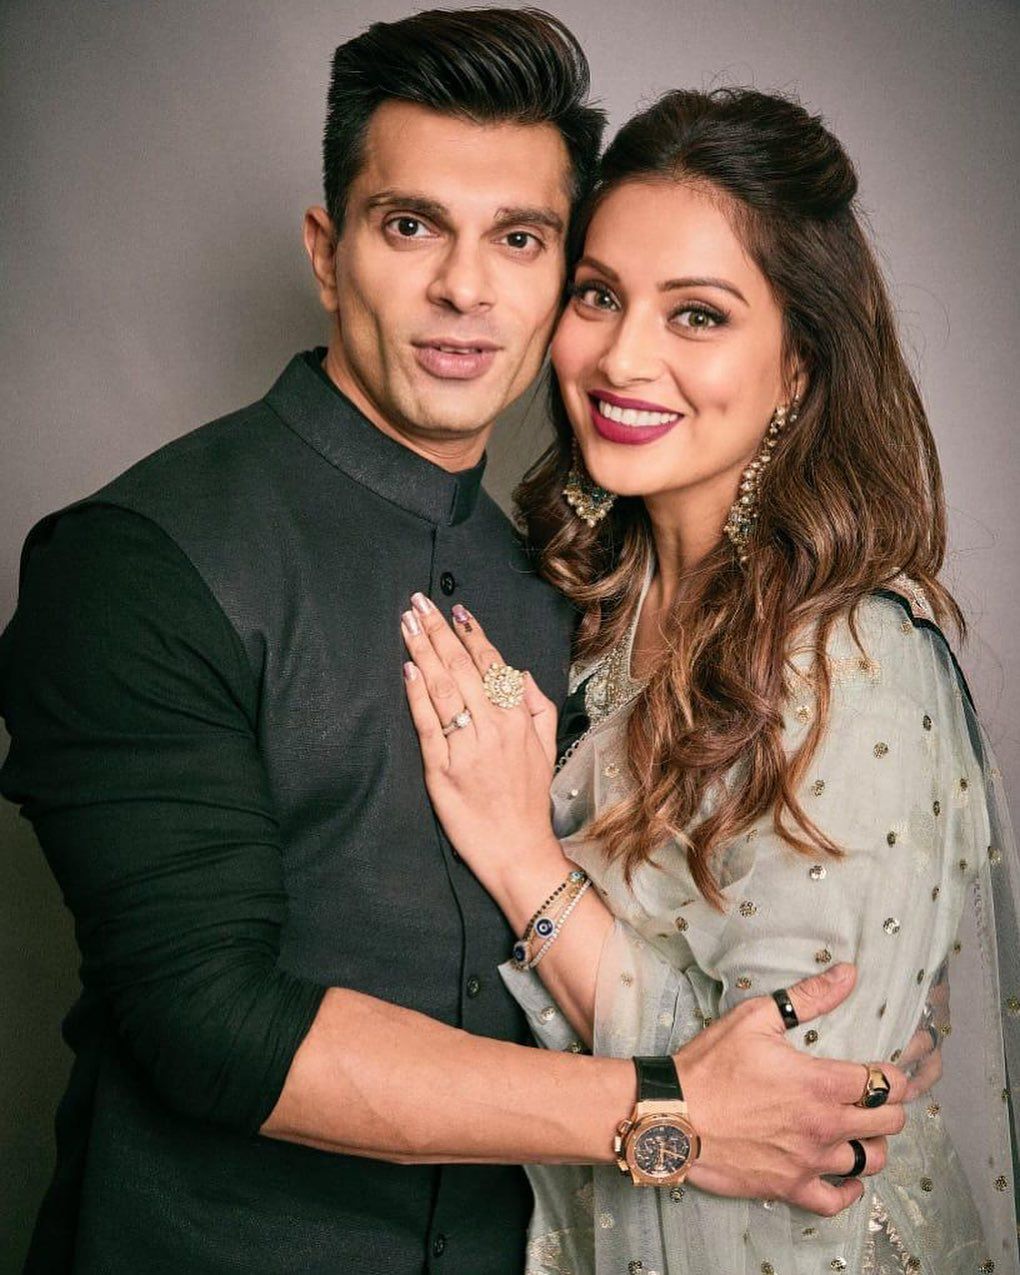 Bipasha Basu Reveals All About Karan Singh Grover's Romantic Proposal, Says ‘I Was Tongue-Tied And Crying’